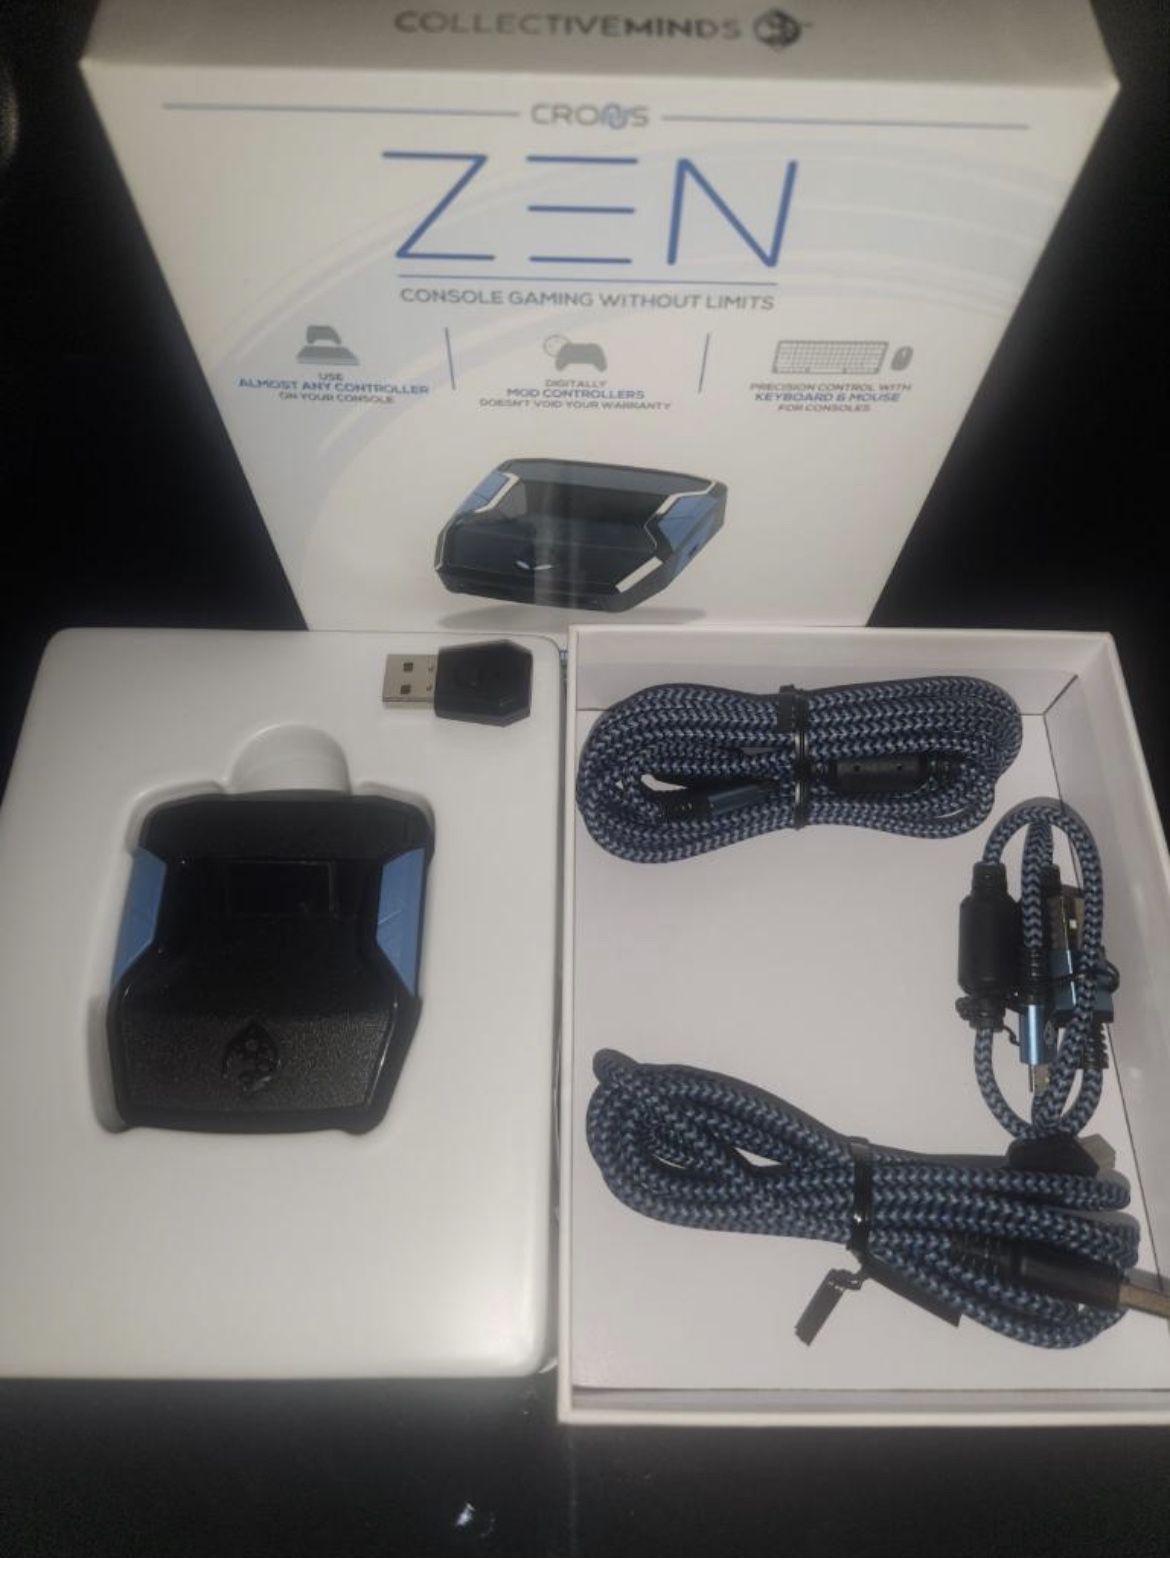 Collective Minds Cronus Zen PS5 dongle NEW sealed in hand FREE